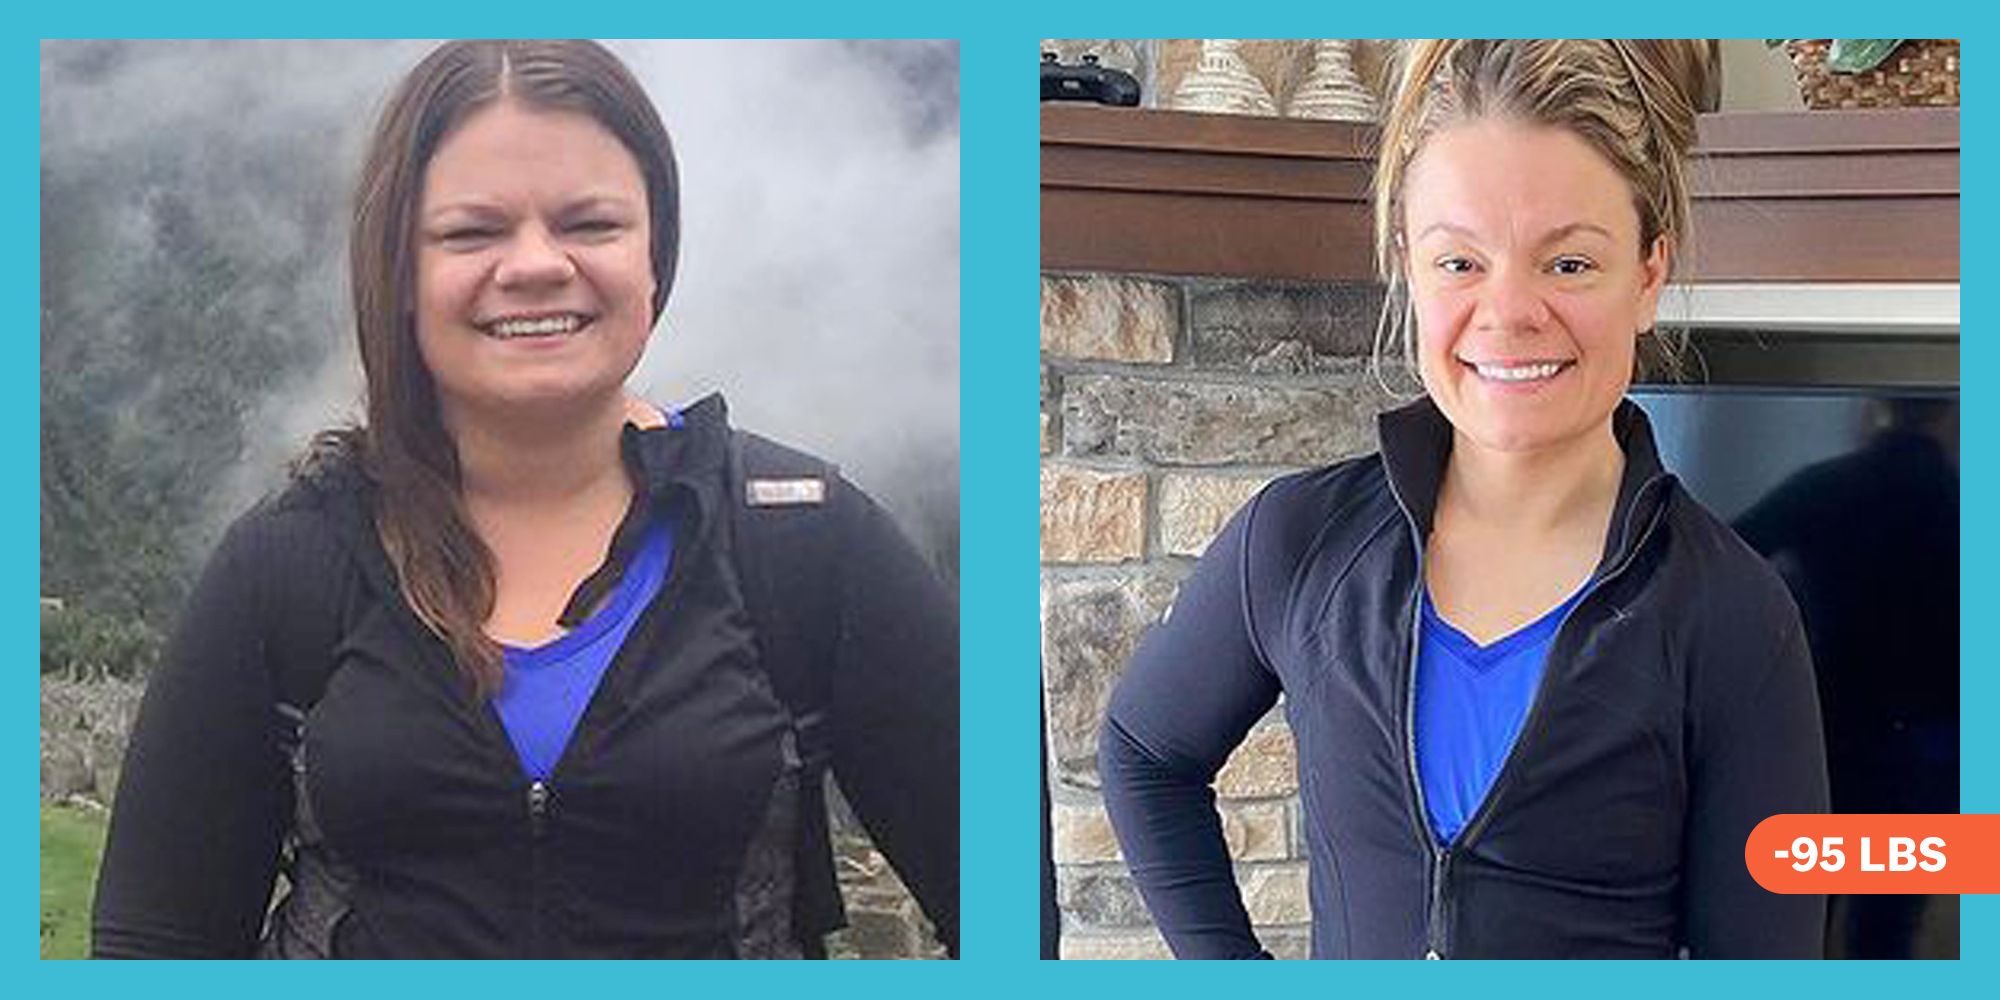 Weight Watchers And Counting Calories Helped Me Lose 95 Pounds image